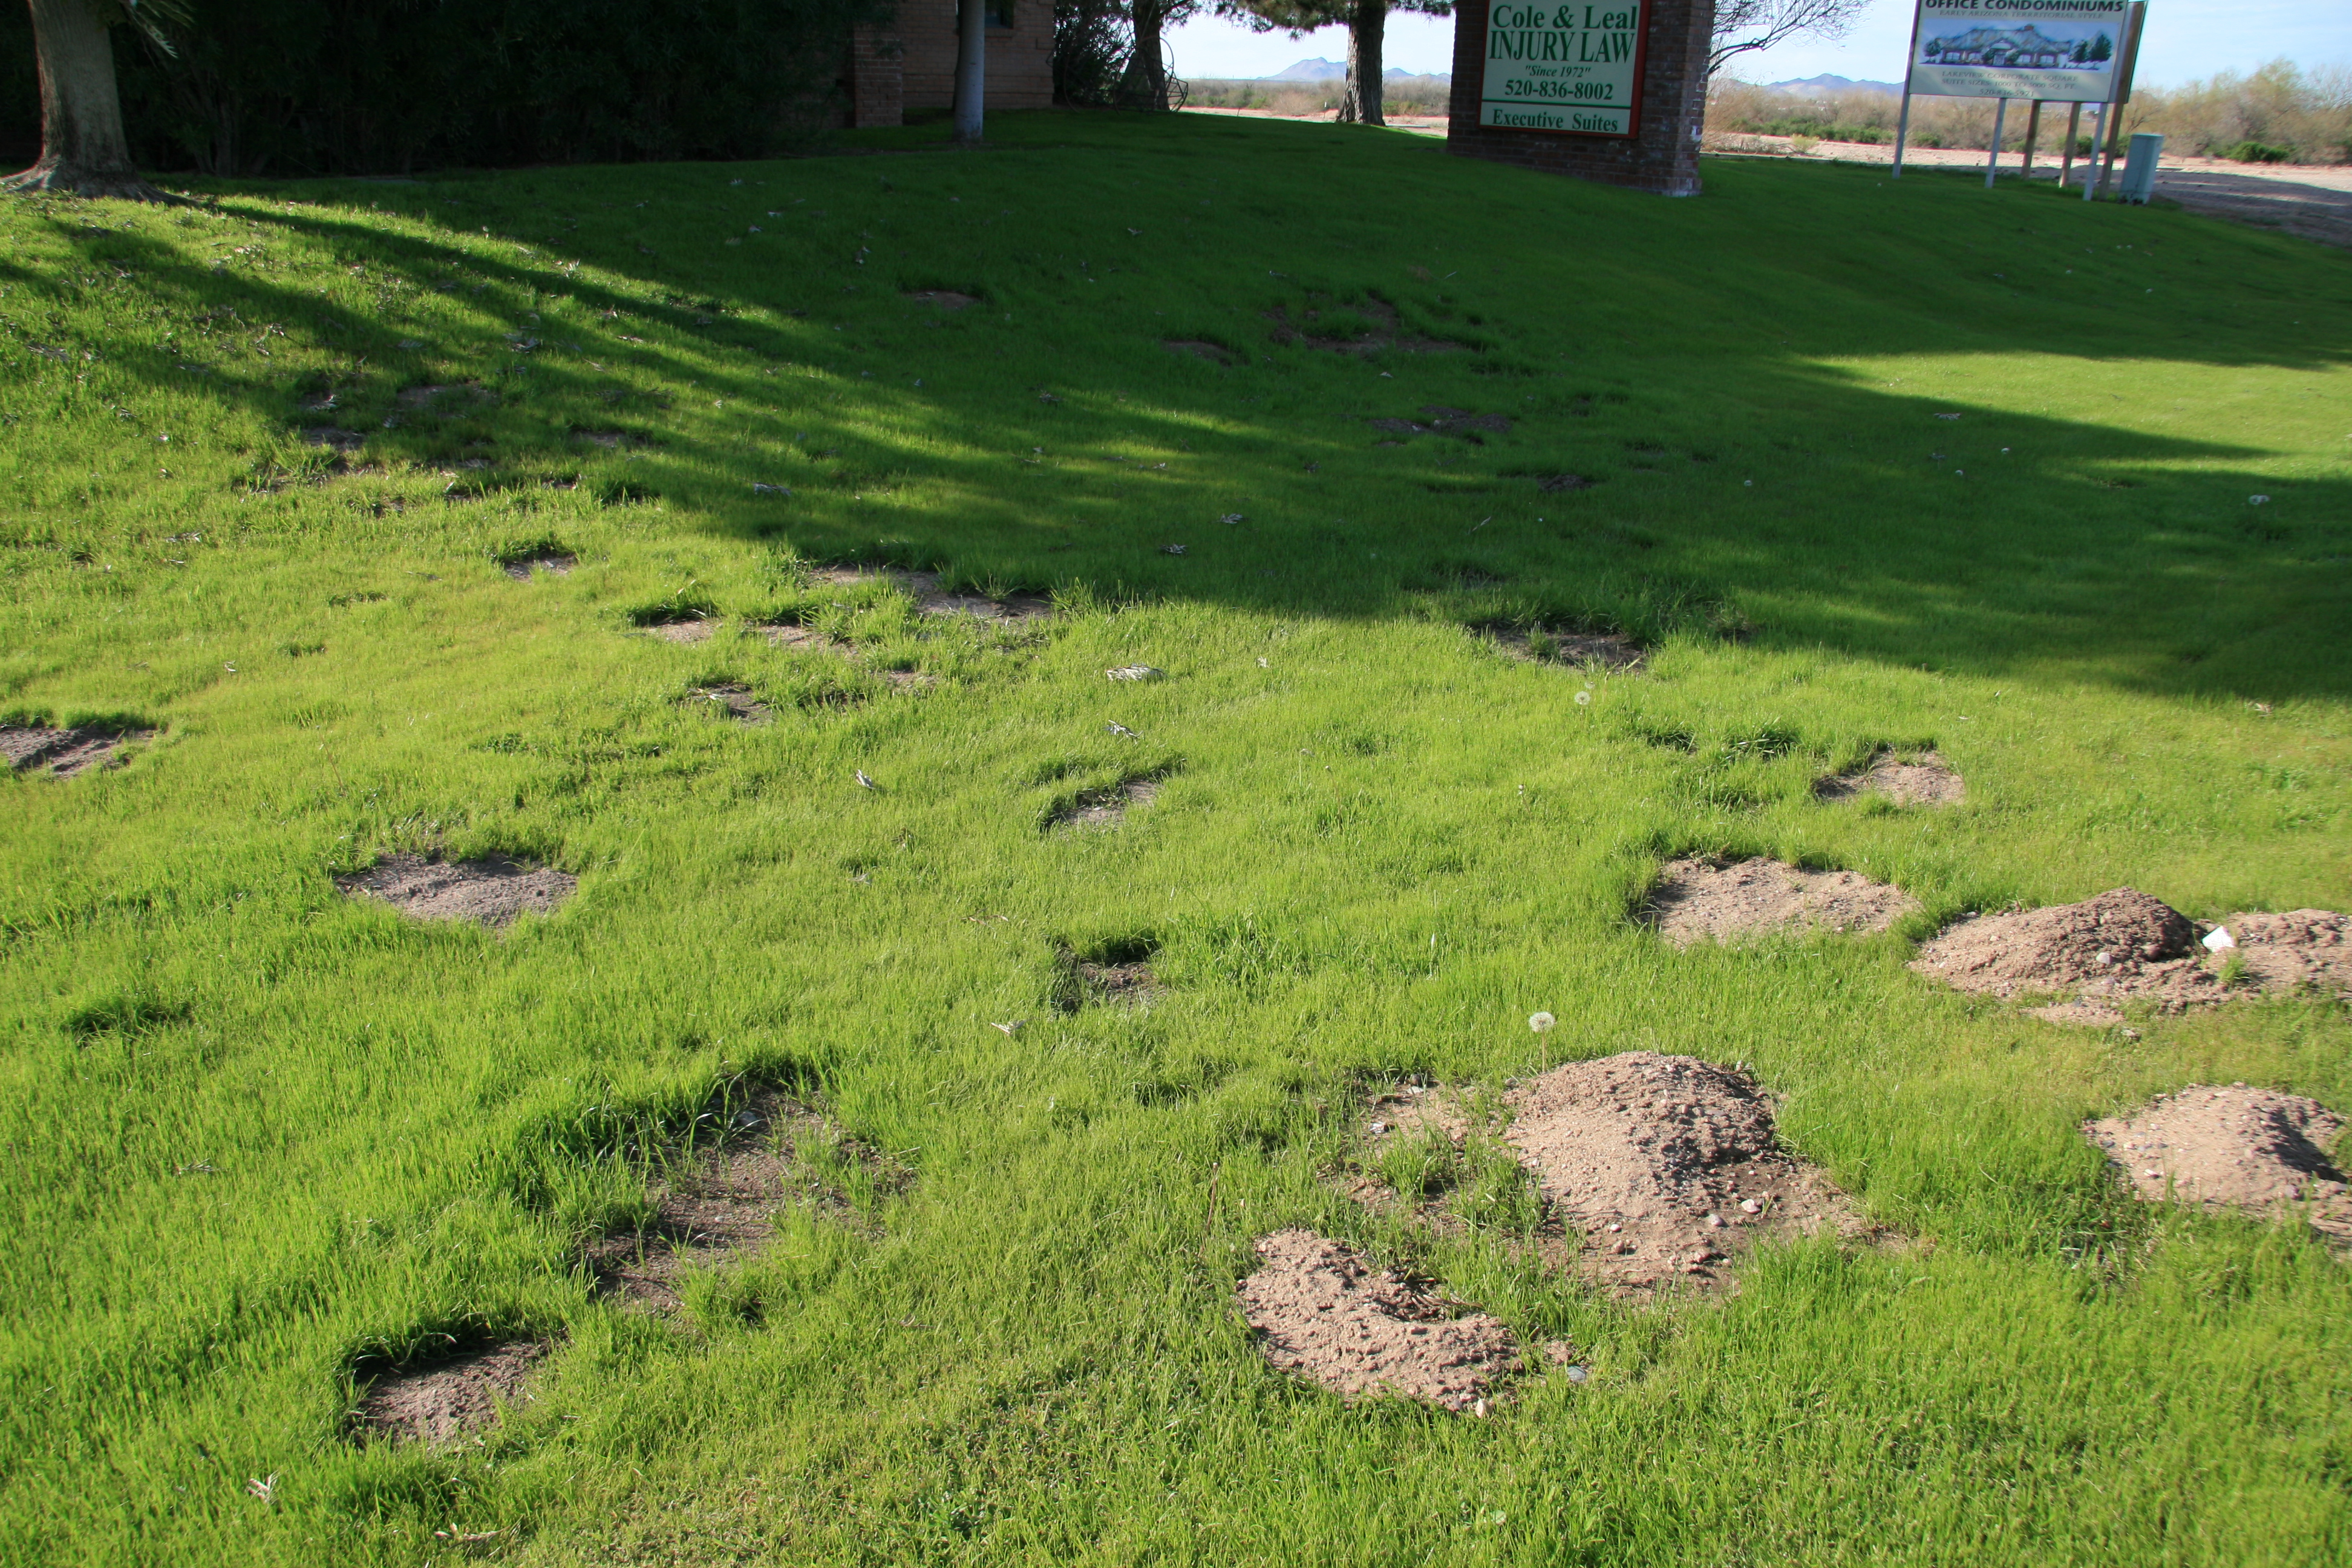 gophers and lawns